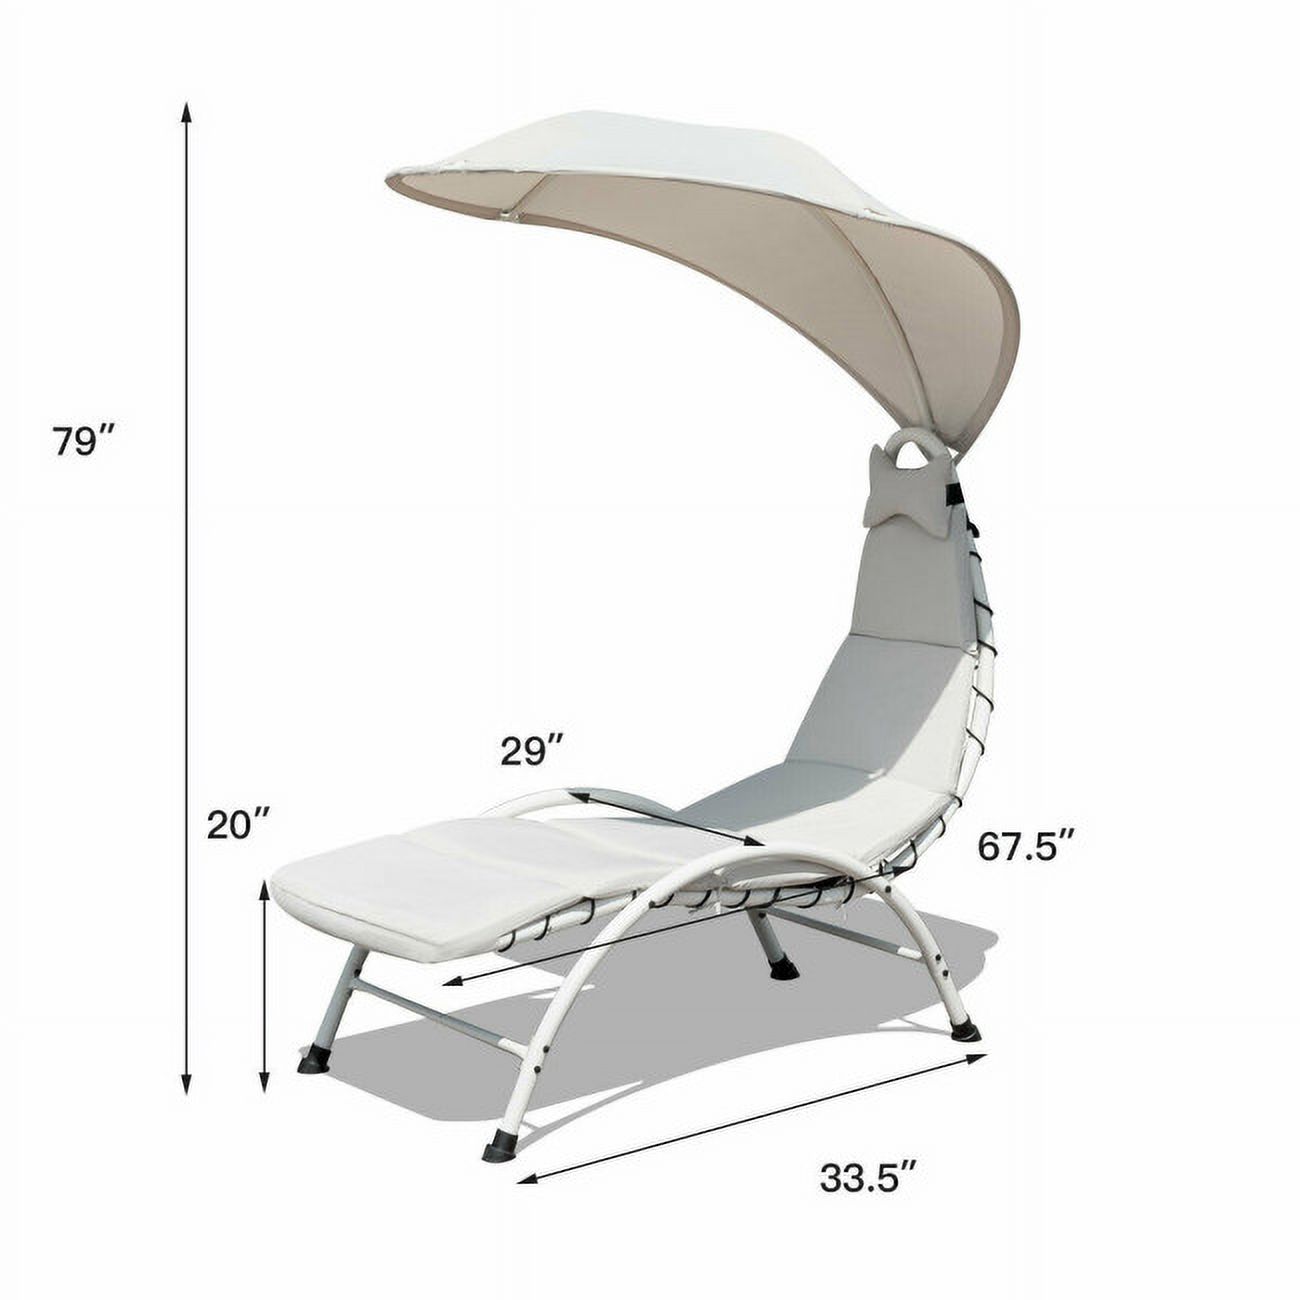 GIVIMO Patio Hanging Swing Hammock Chaise Lounger Chair with Canopy - image 4 of 9